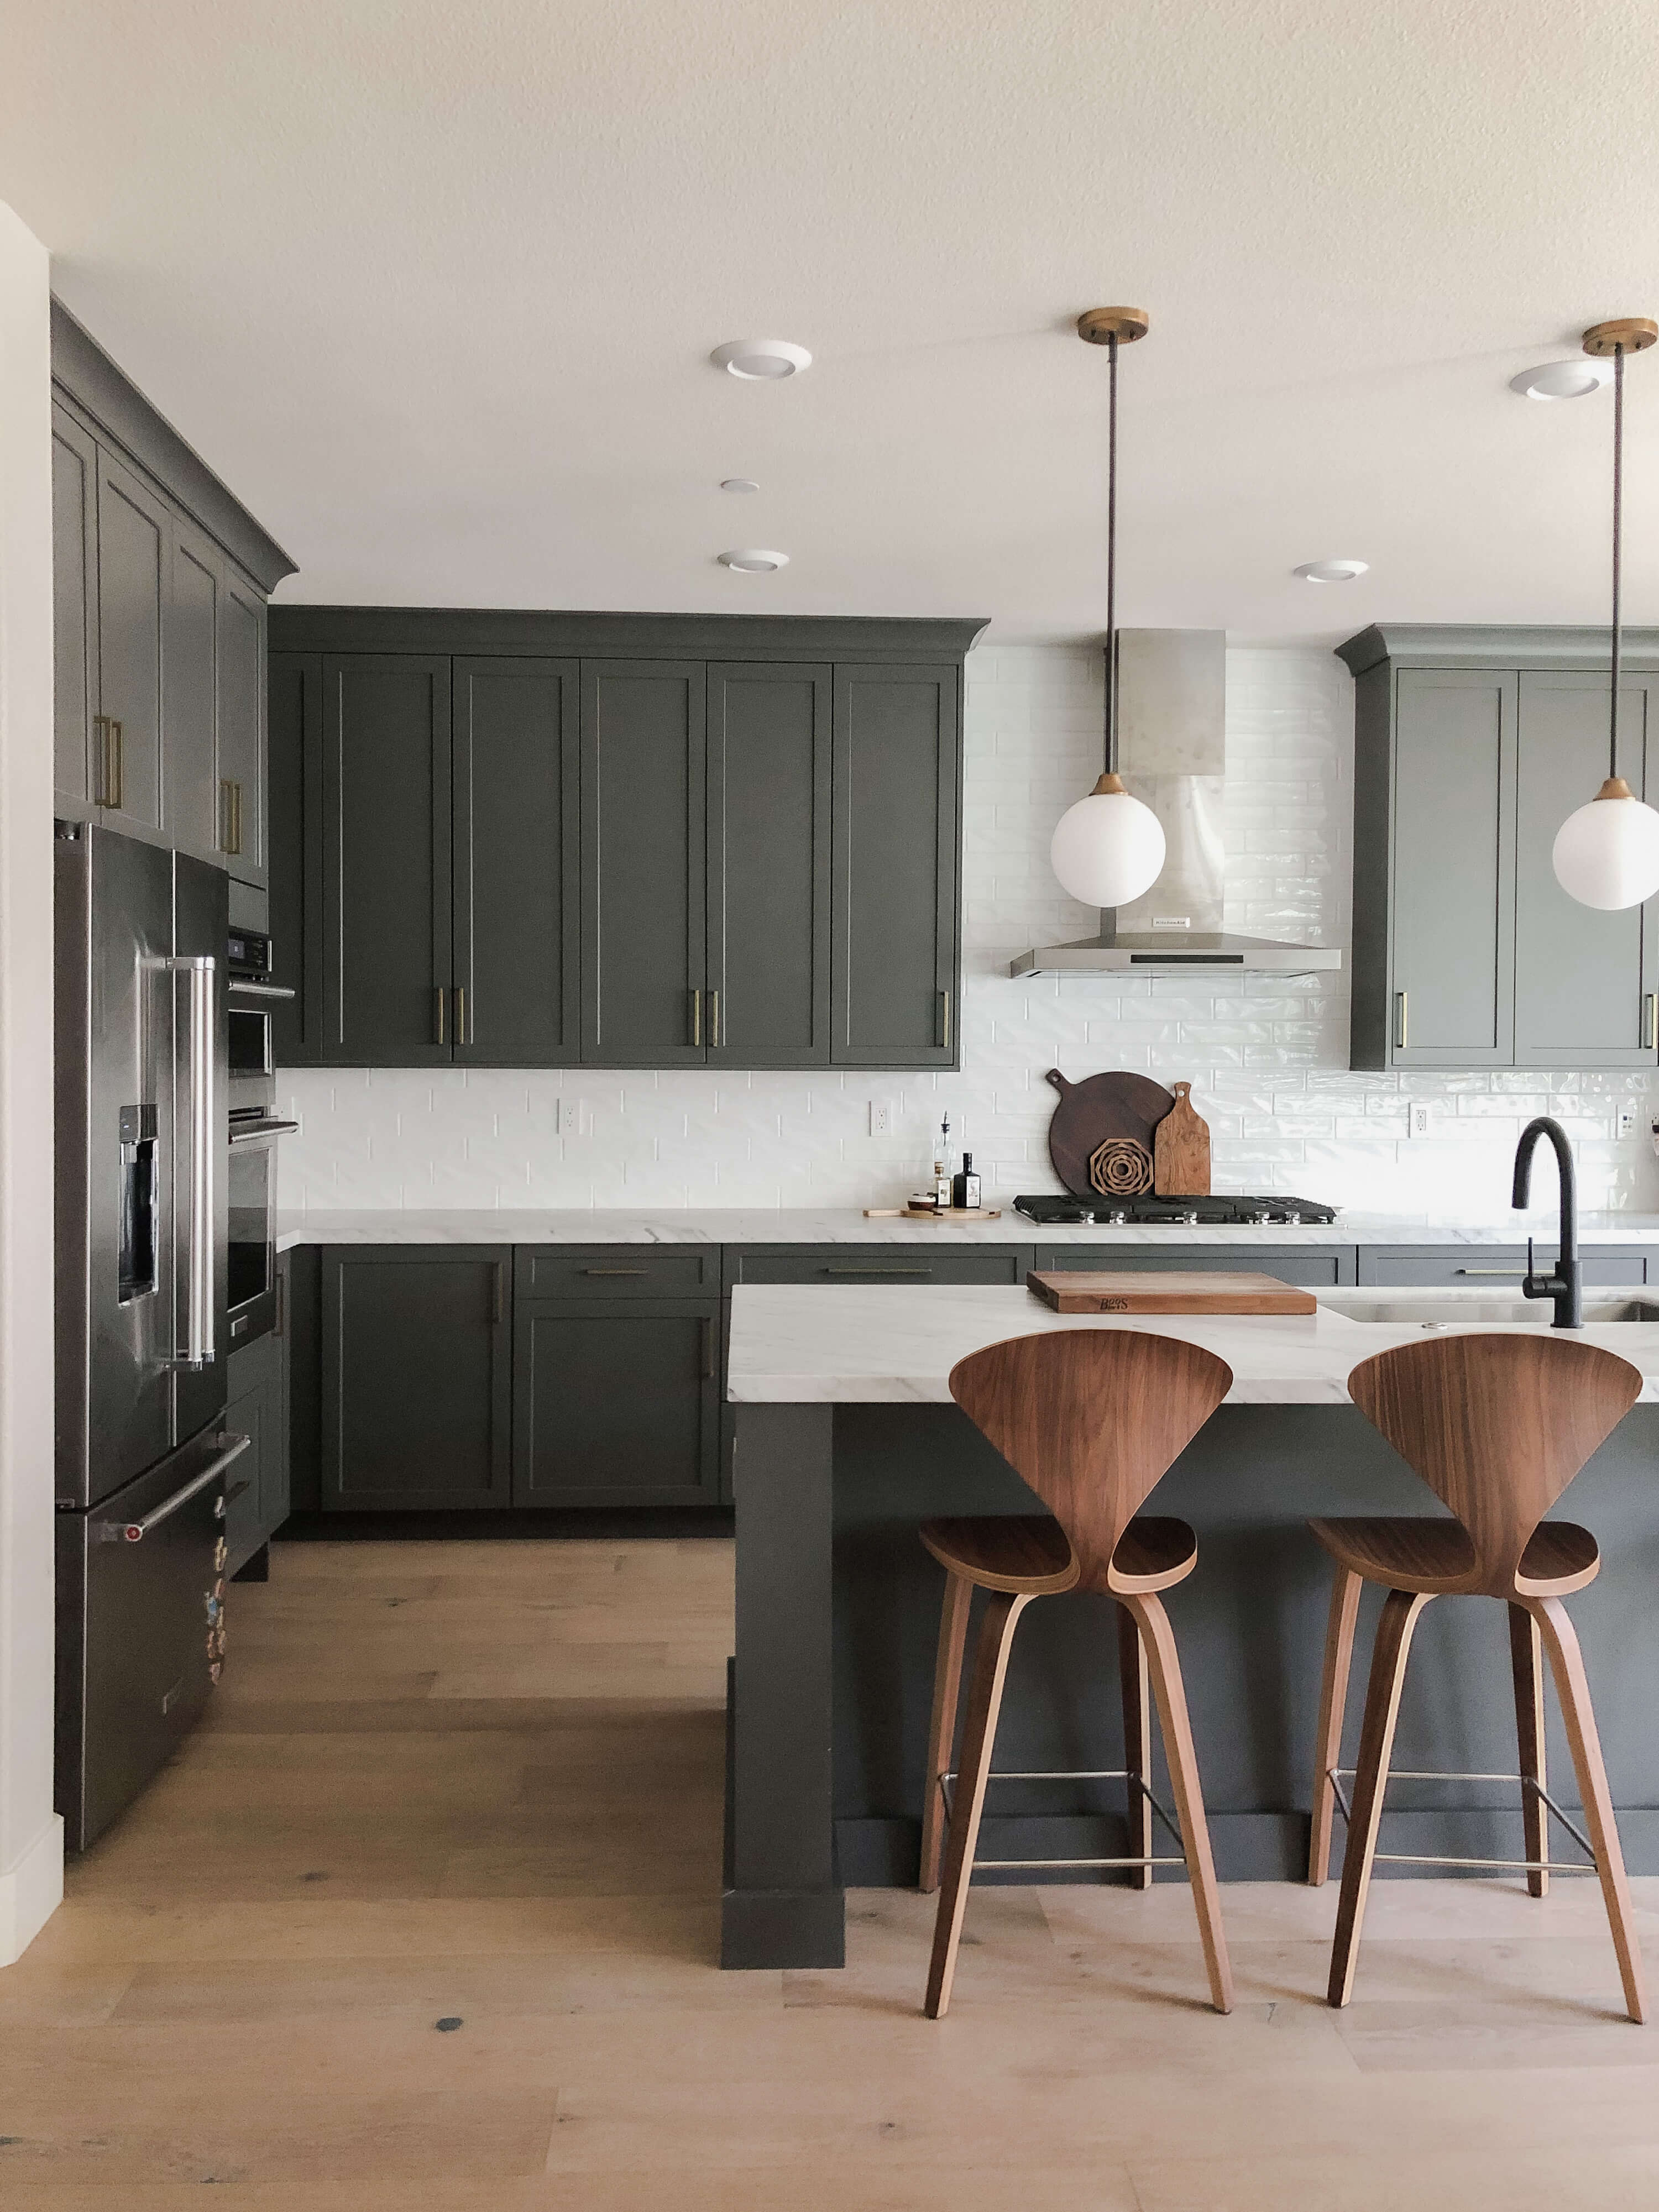 A dark and moody kitchen remodel with deep green painted cabinets from Dura Supreme.